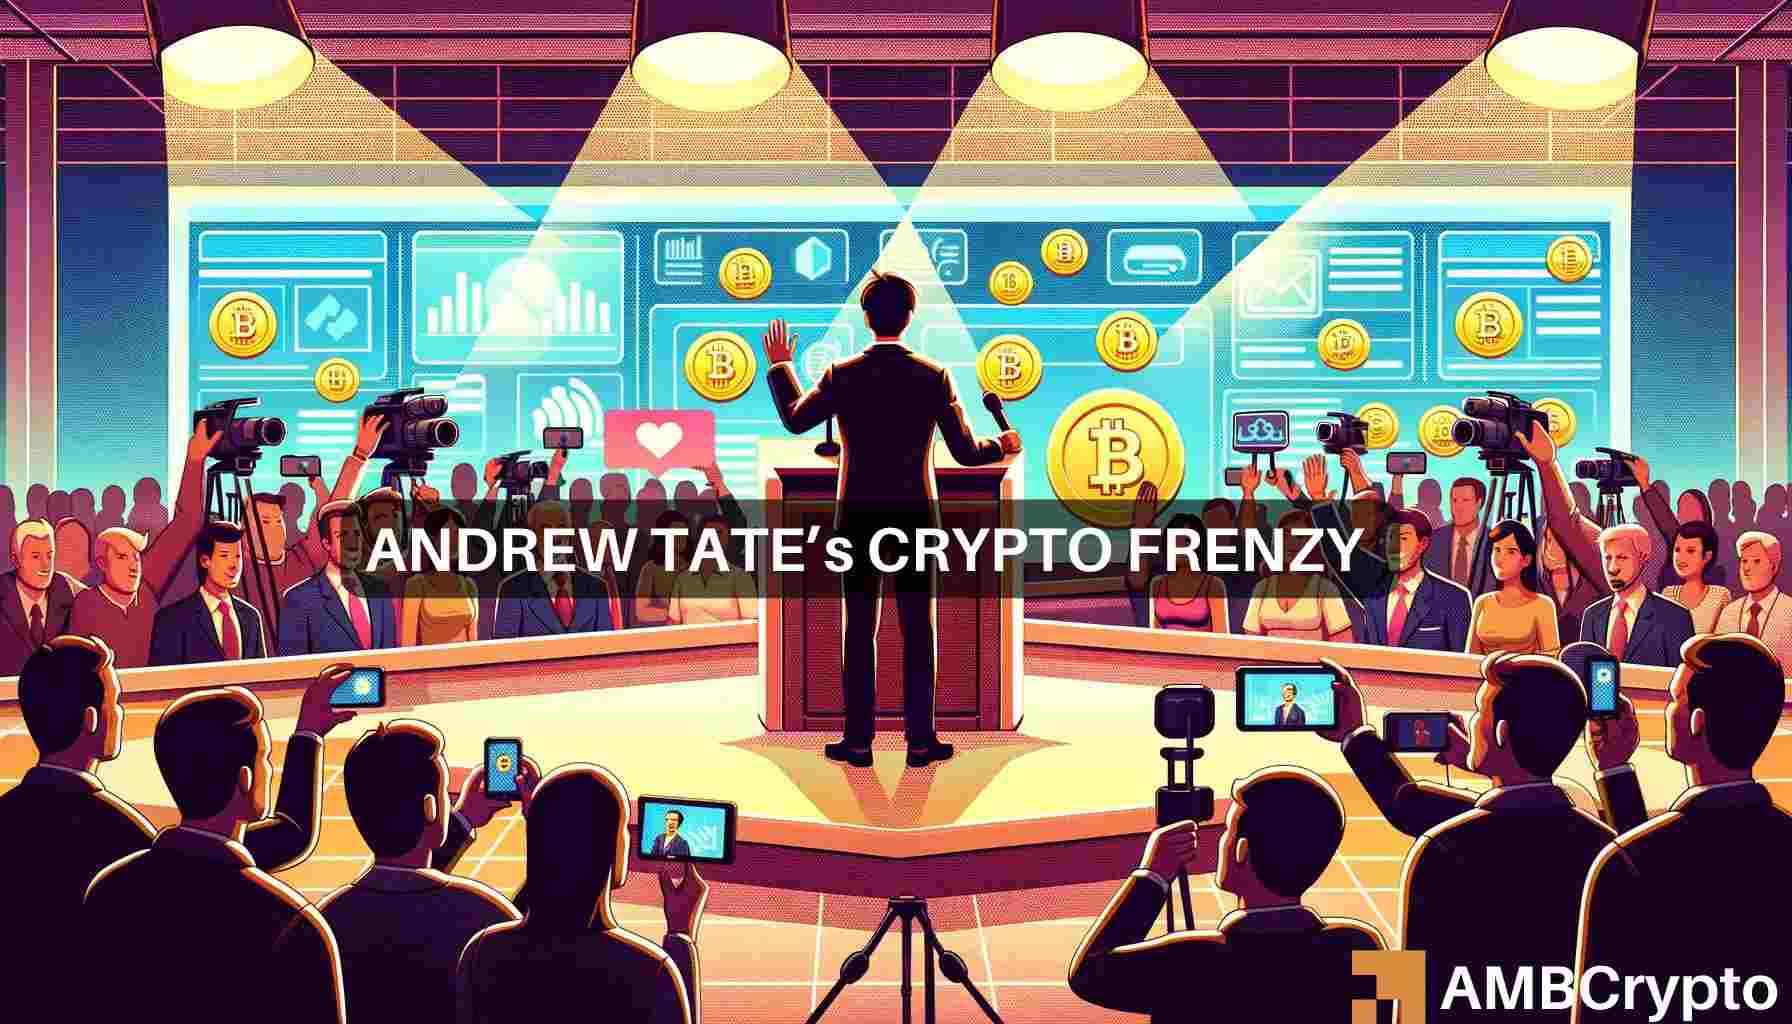 What Andrew Tate’s ‘crypto insanity’ has to do with Vitalik Buterin